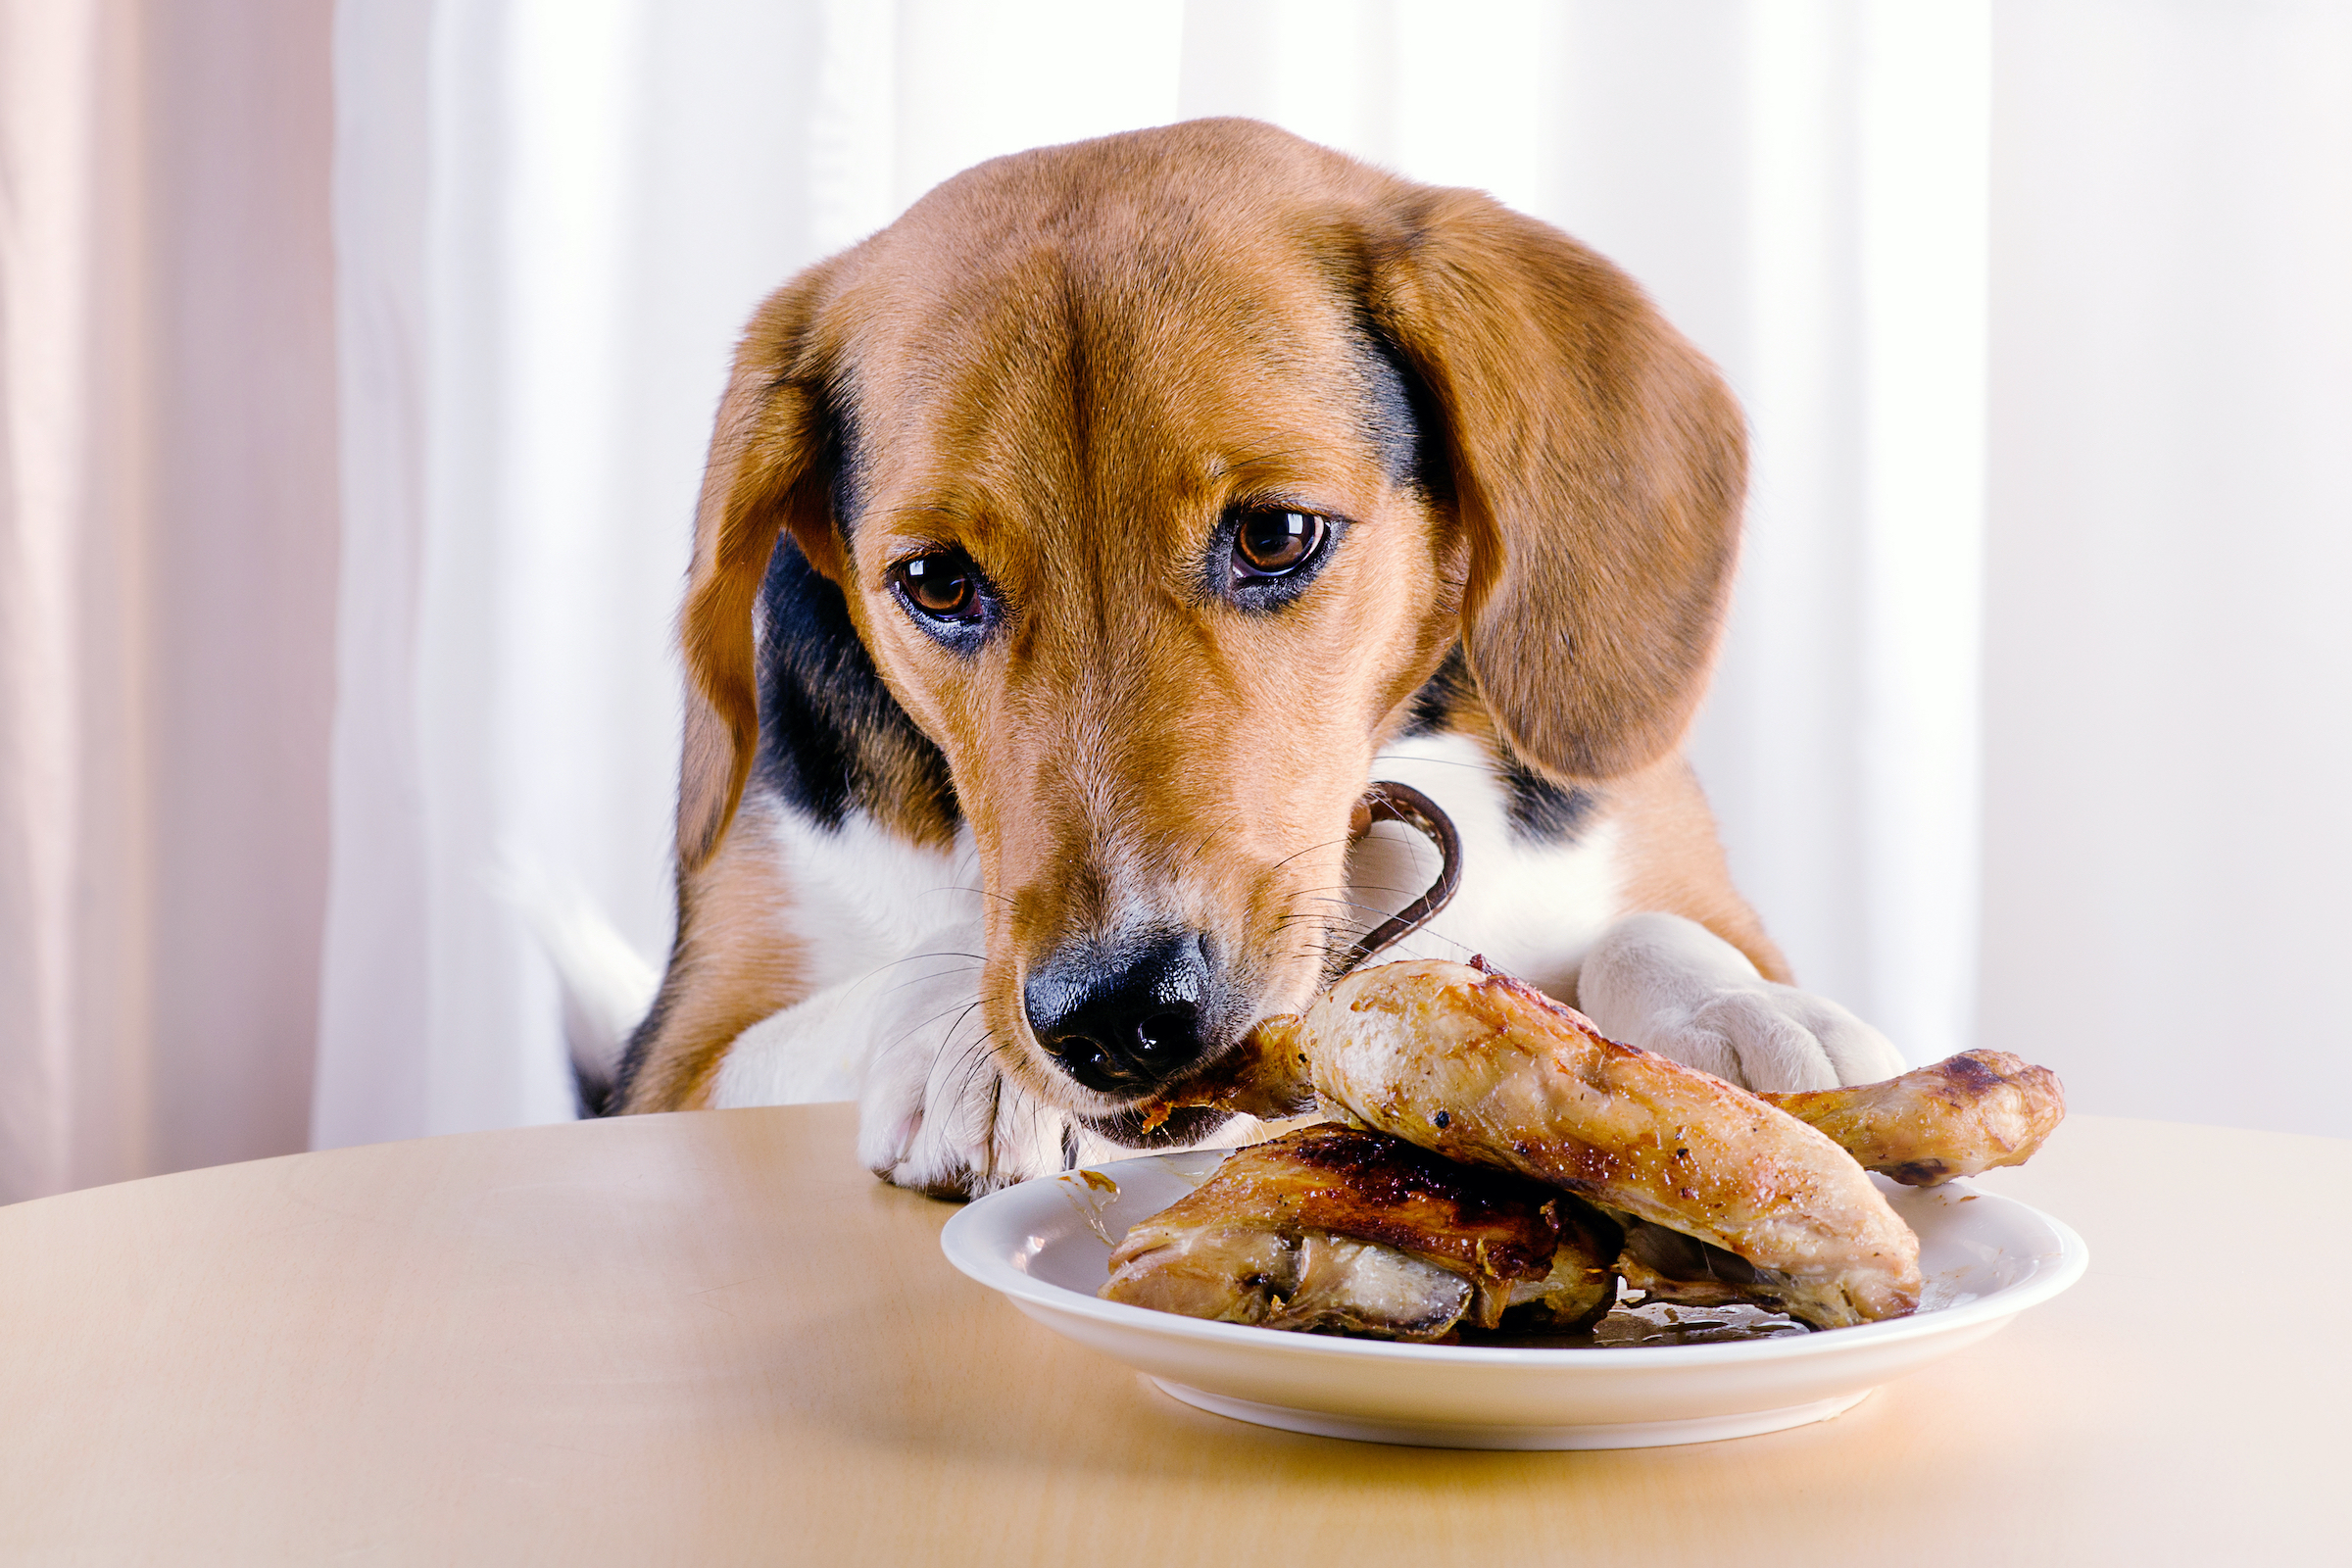  Is it healthy to feed a dog bread?